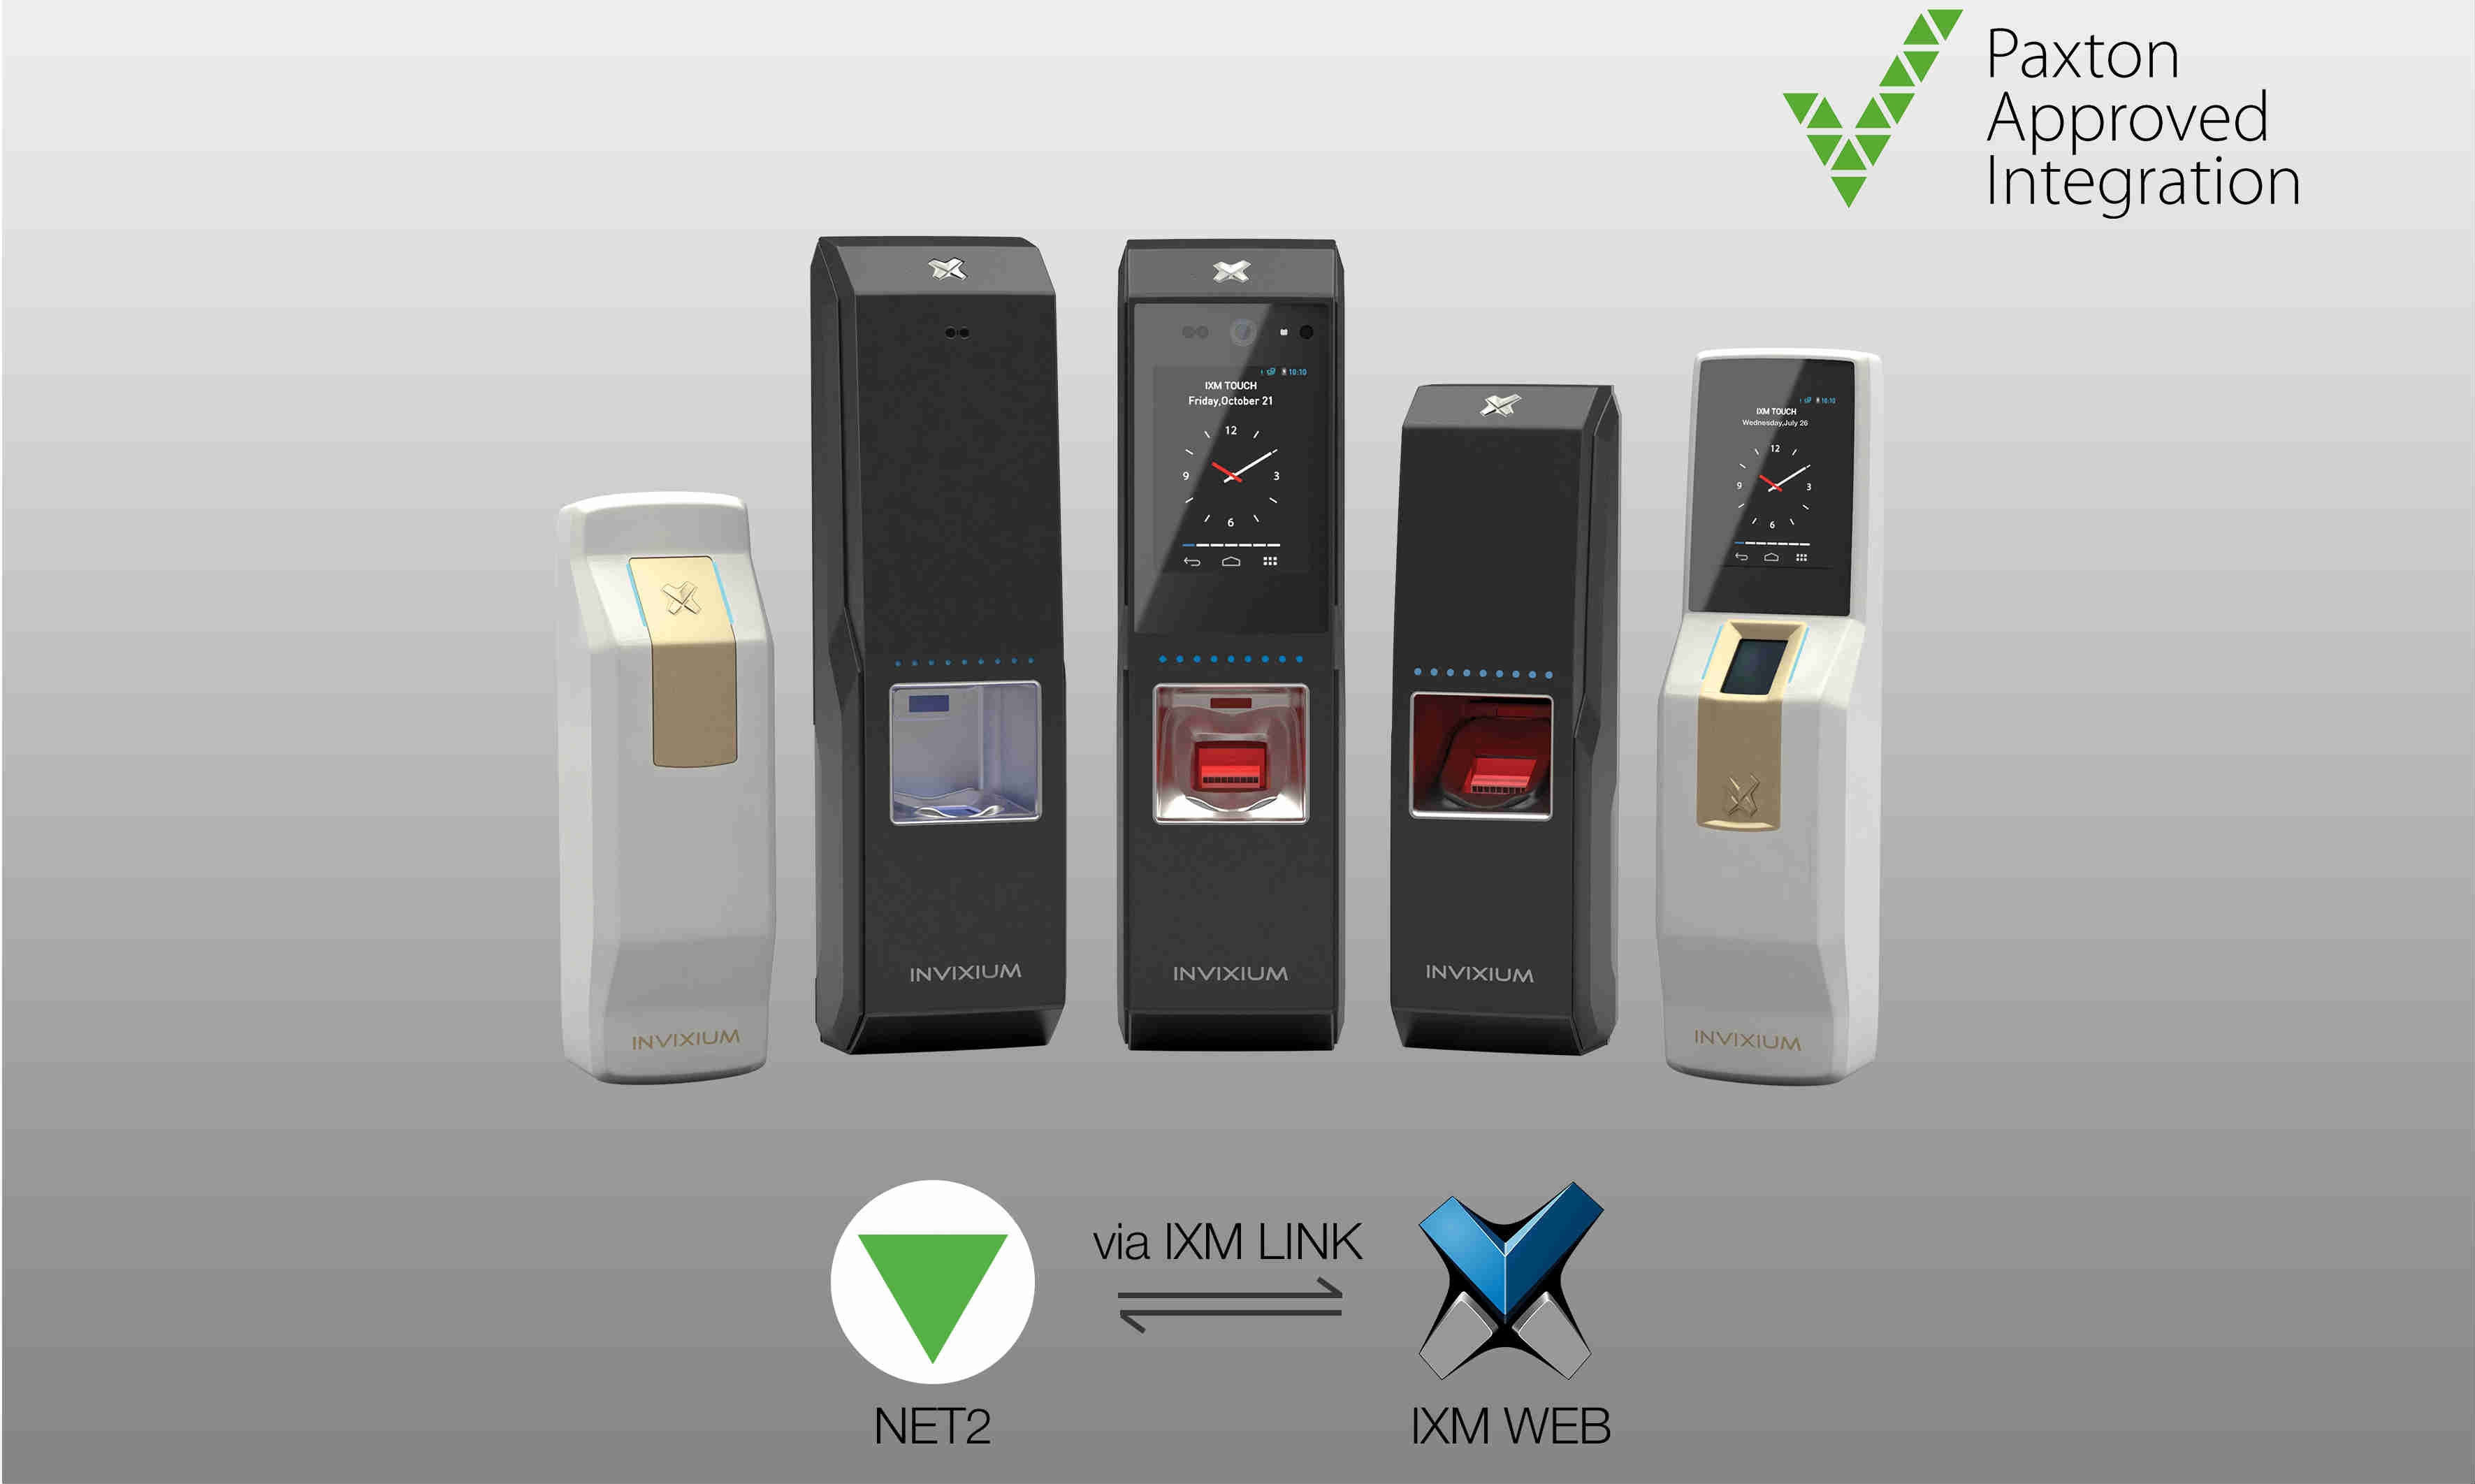 Invixium Integrates with Paxton’s Net2 Access Control to Provide a Simple Biometric Experience